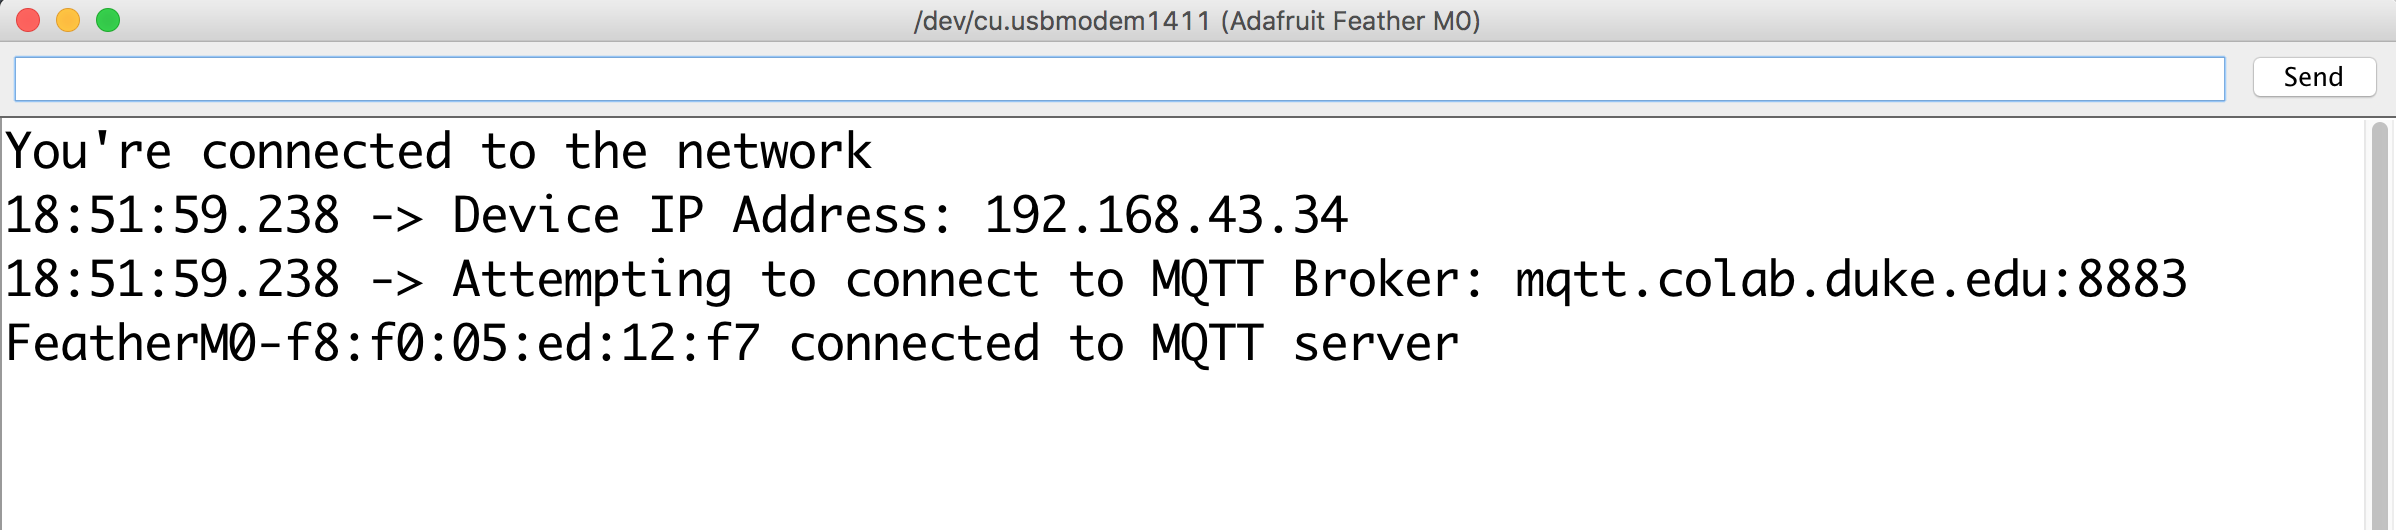 Successful connection to MQTT server